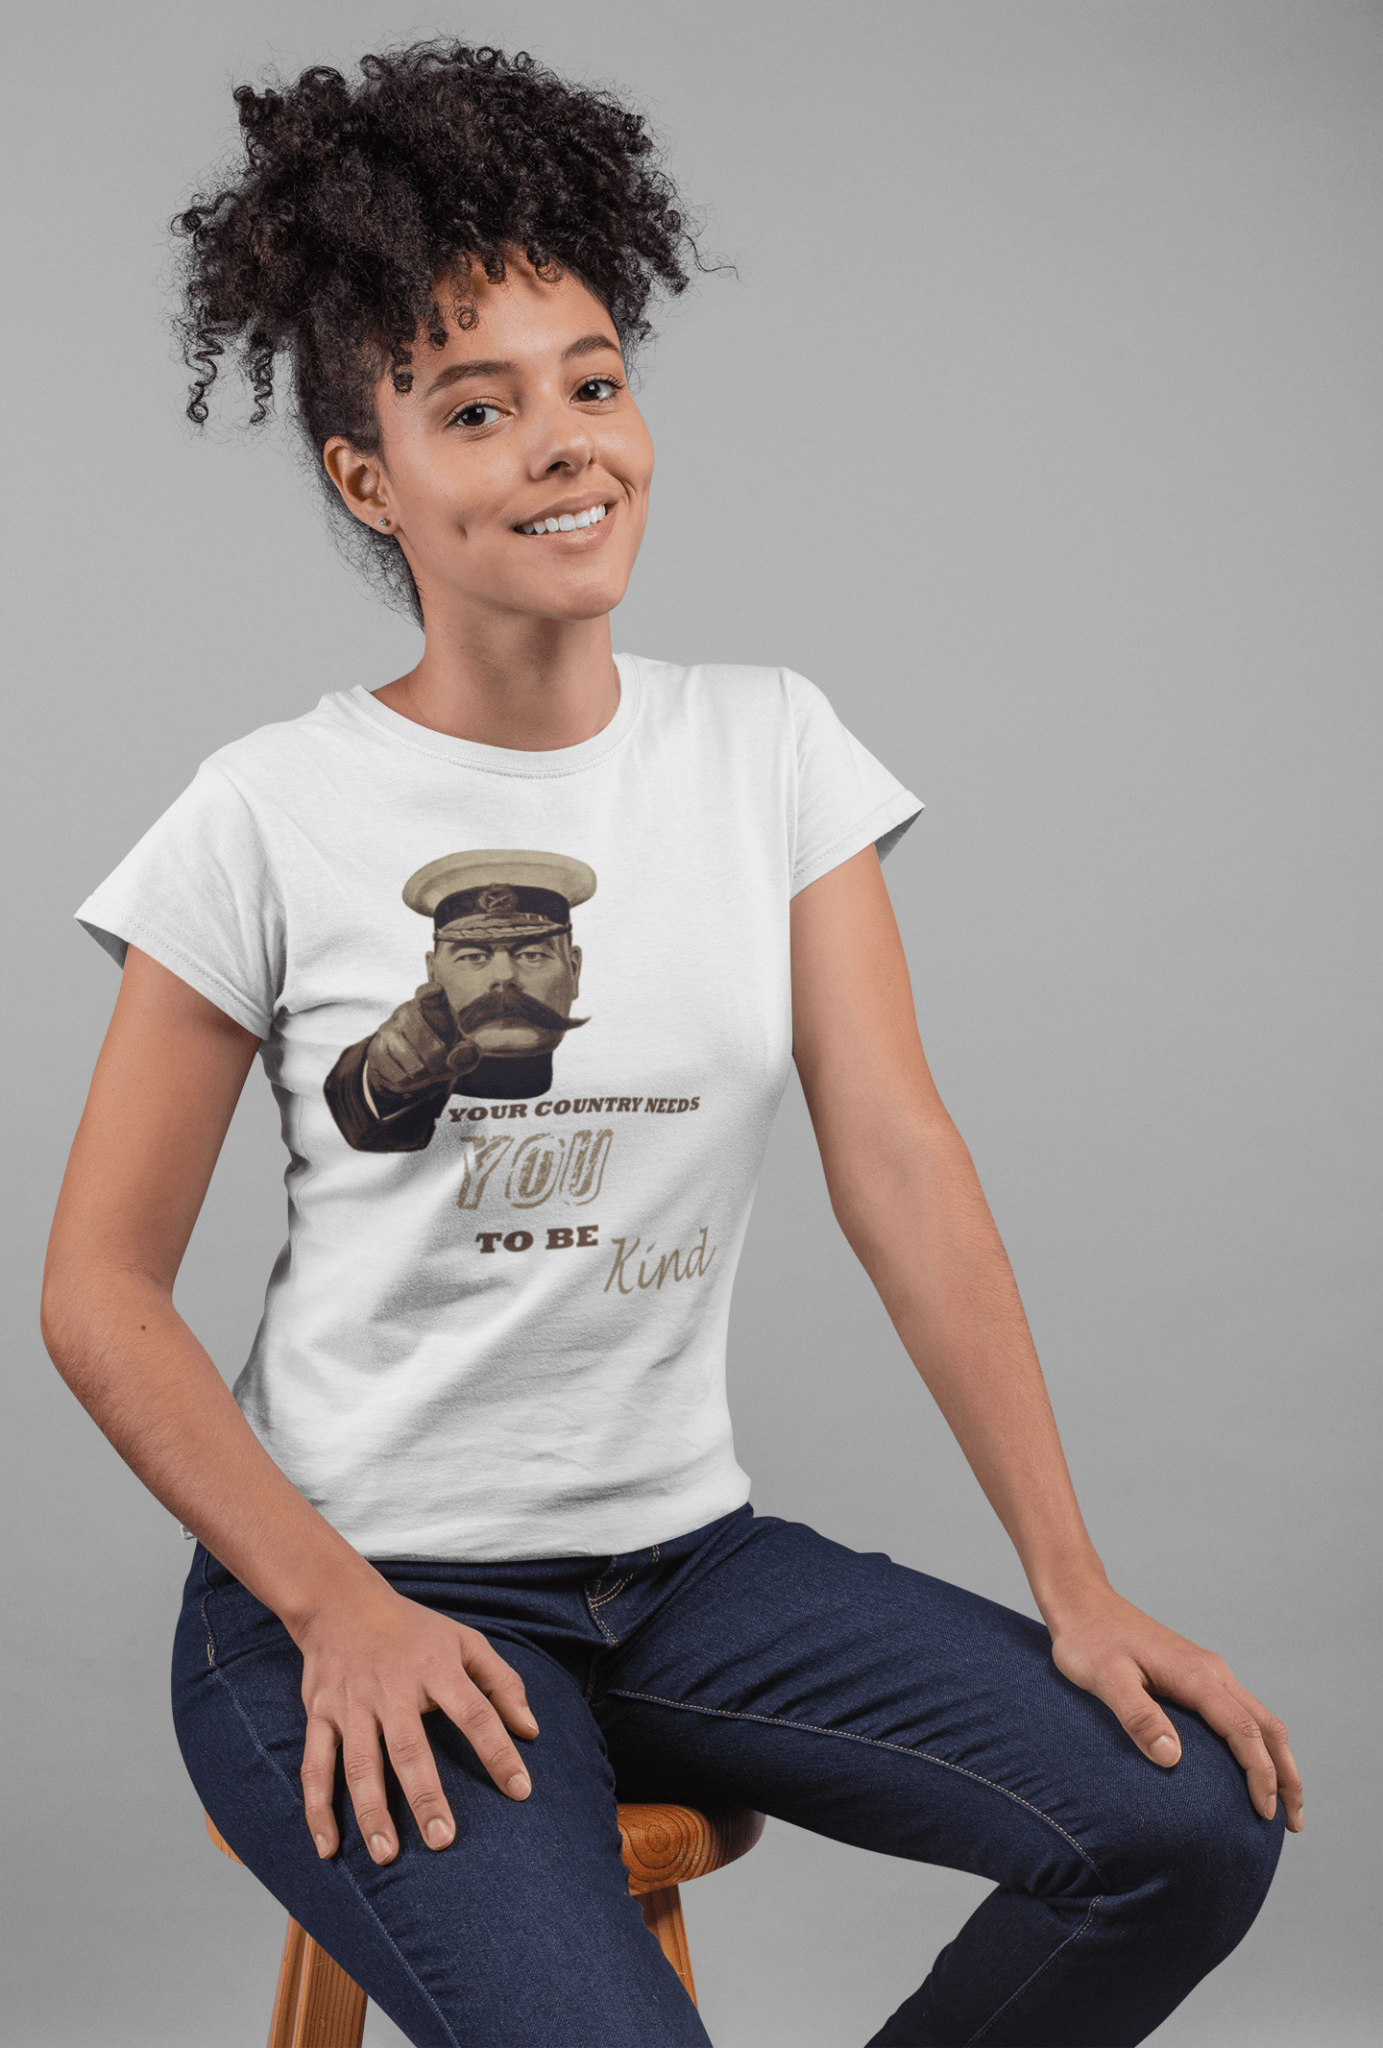 WOMEN'S ‘YOUR COUNTRY NEEDS YOU TO BE KIND’ ORGANIC COTTON T-SHIRT - Pixel Gallery